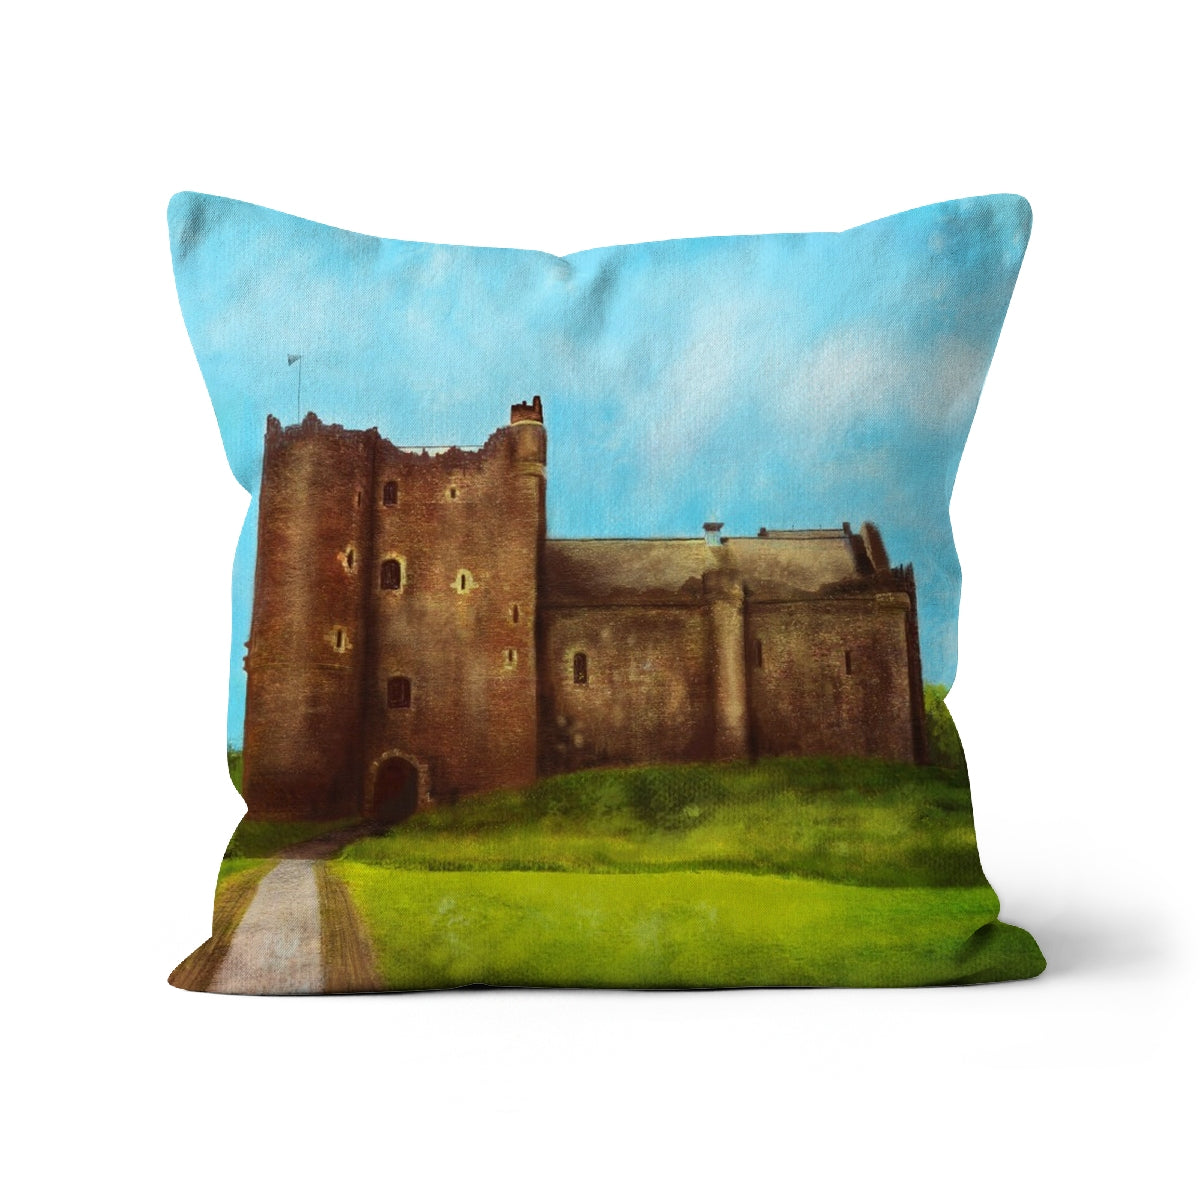 Doune Castle Art Gifts Cushion-Cushions-Historic & Iconic Scotland Art Gallery-Linen-22"x22"-Paintings, Prints, Homeware, Art Gifts From Scotland By Scottish Artist Kevin Hunter